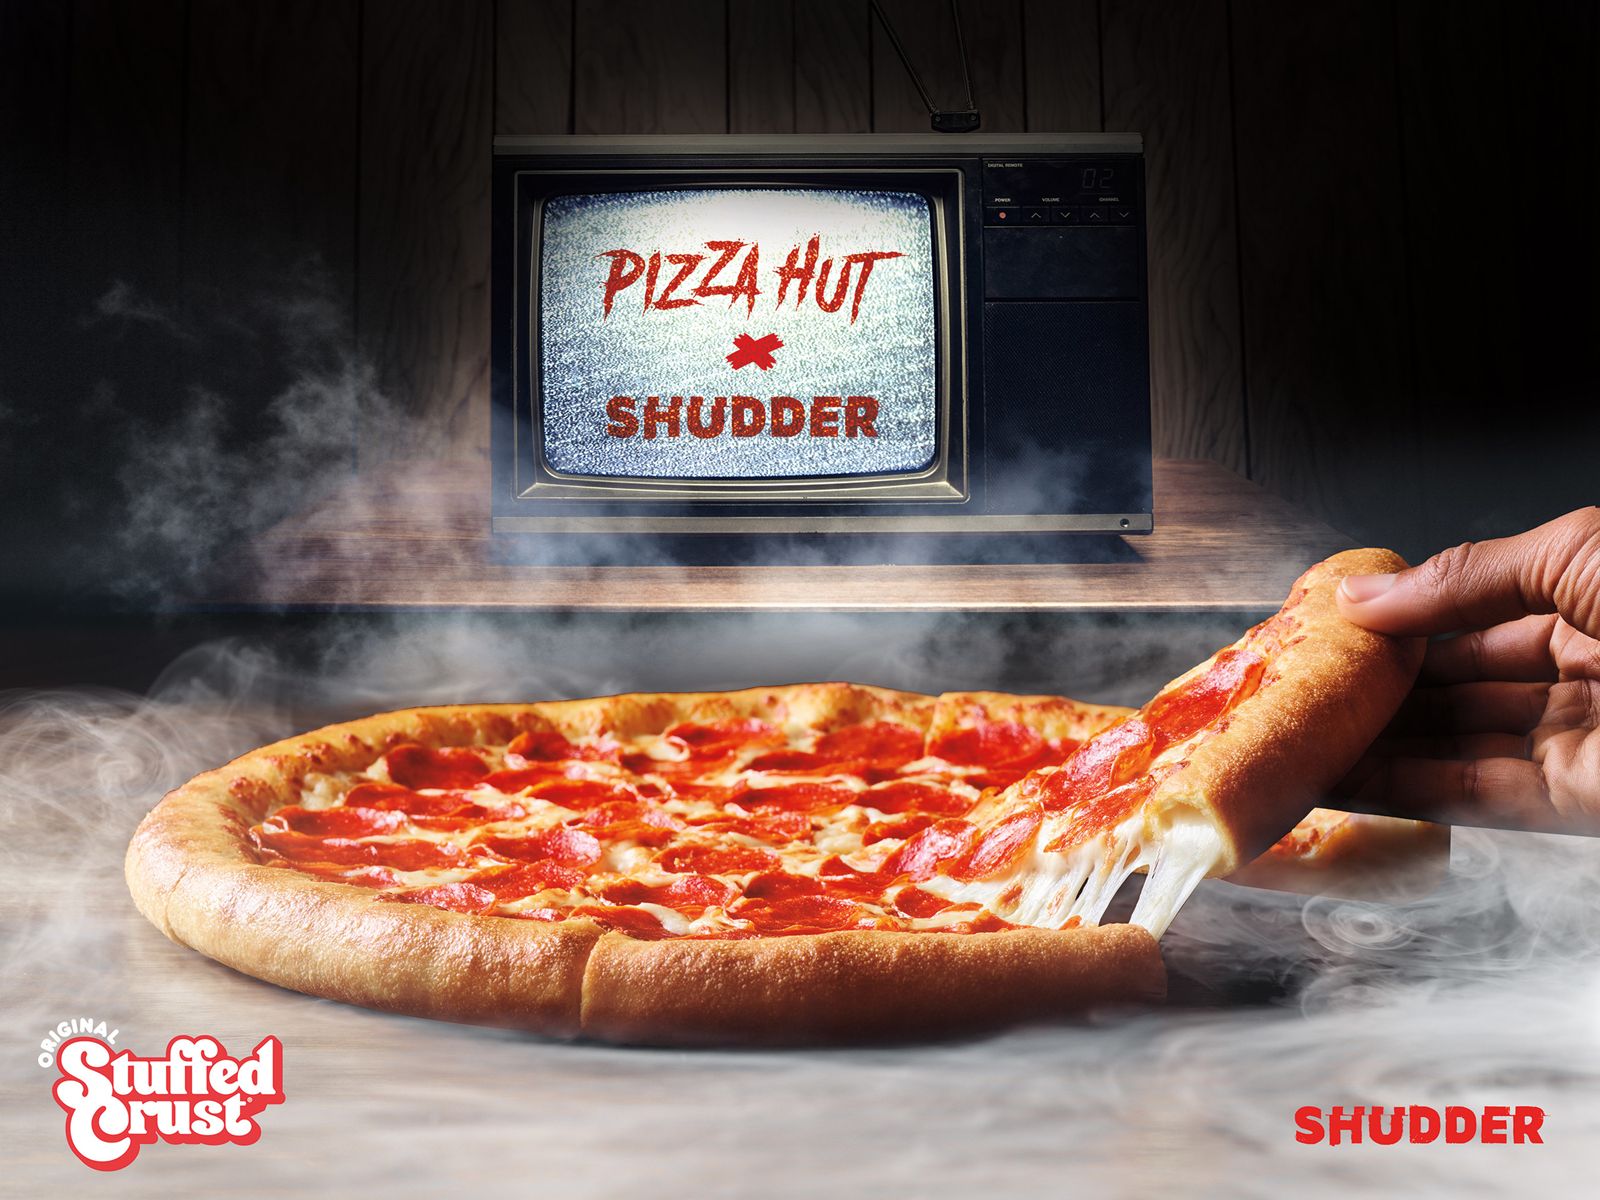 Just in Time for Halloween - Pizza Hut Is Celebrating Its Original Stuffed Crust Pizza With a Scary Good Deal & Free Shudder Streaming Offer